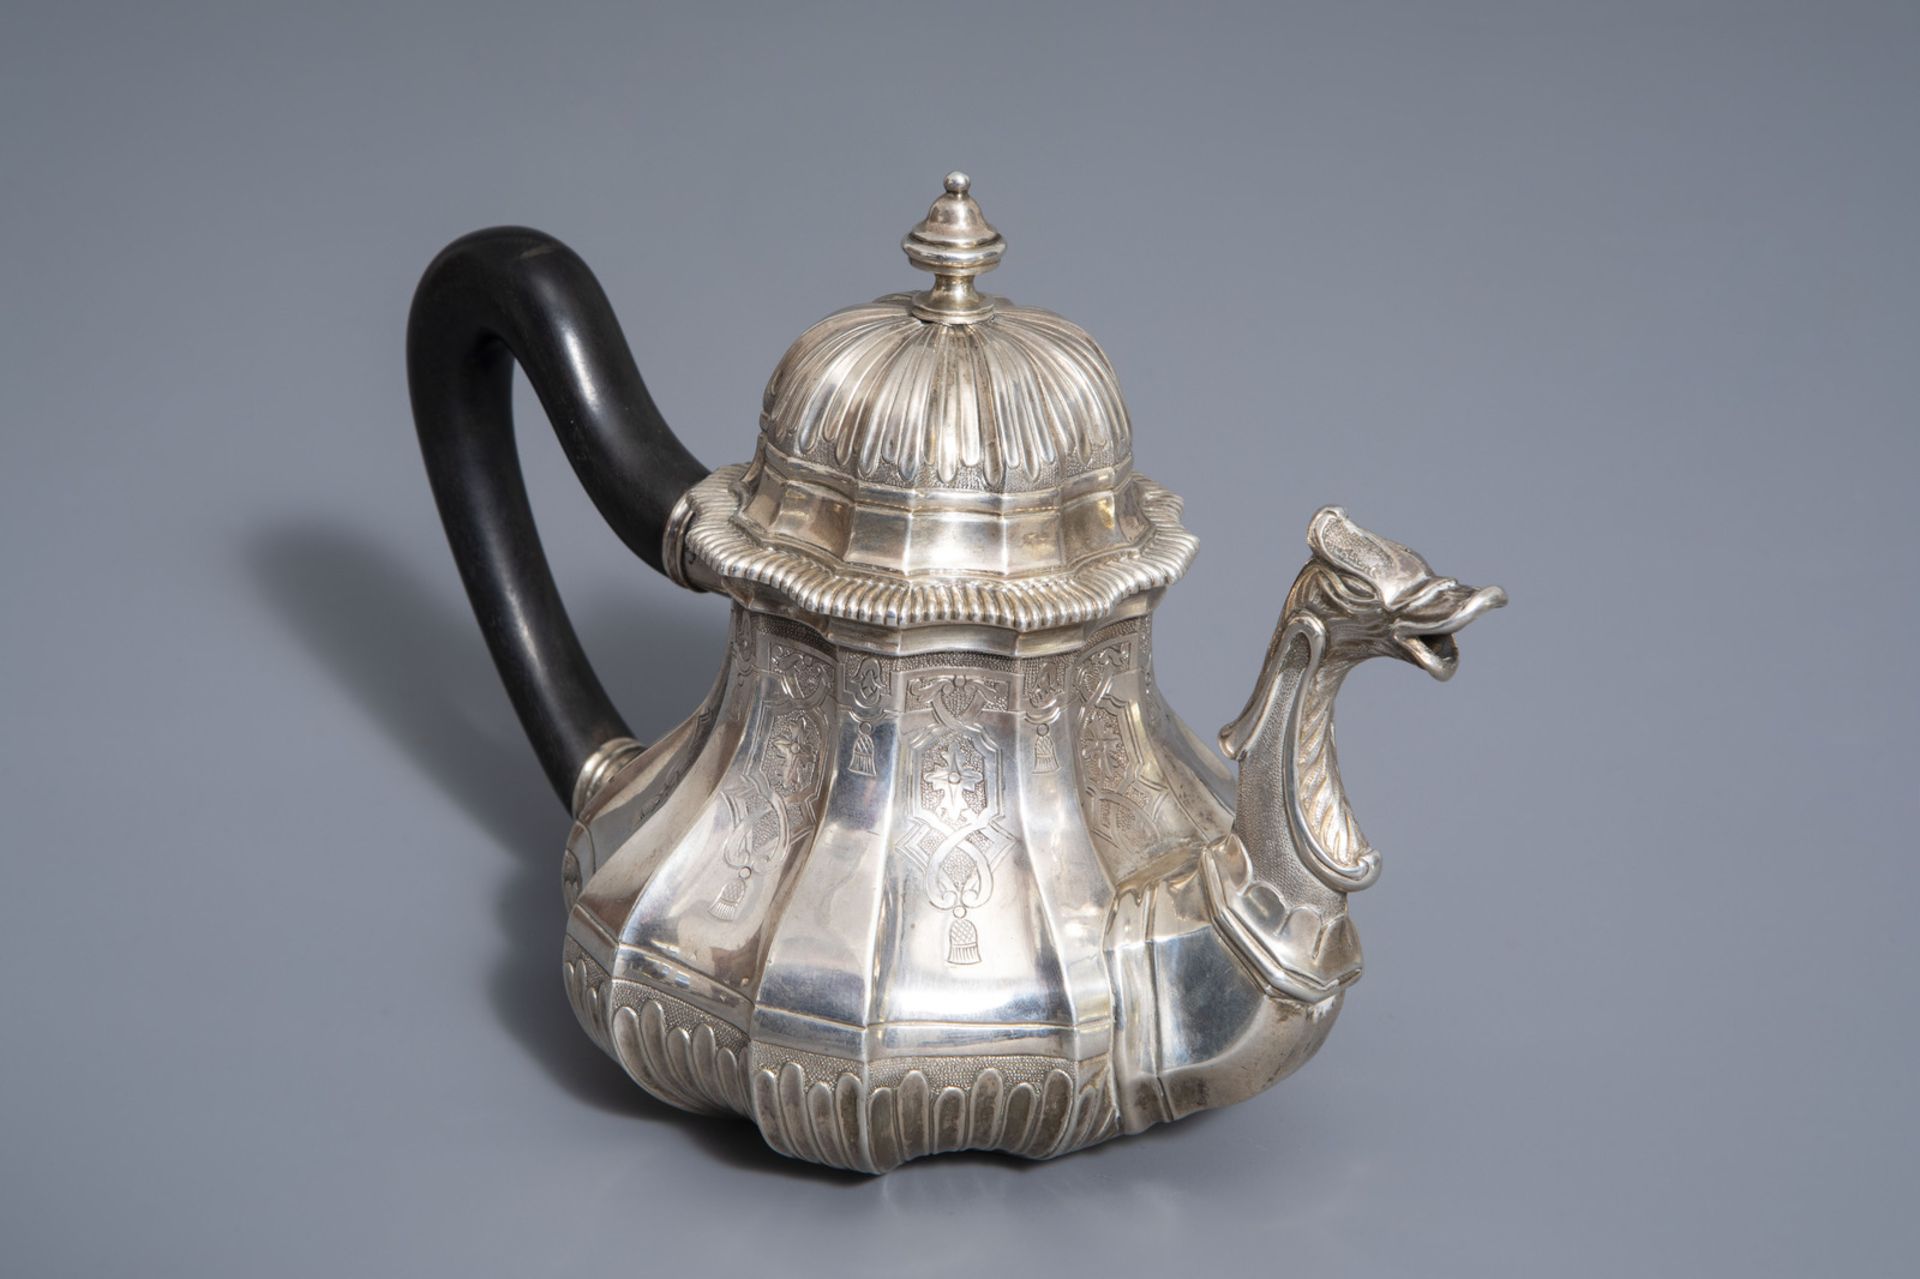 A refined Baroque silver teapot and cover with ebony handle, Ghent, Belgium, probably 19th C.